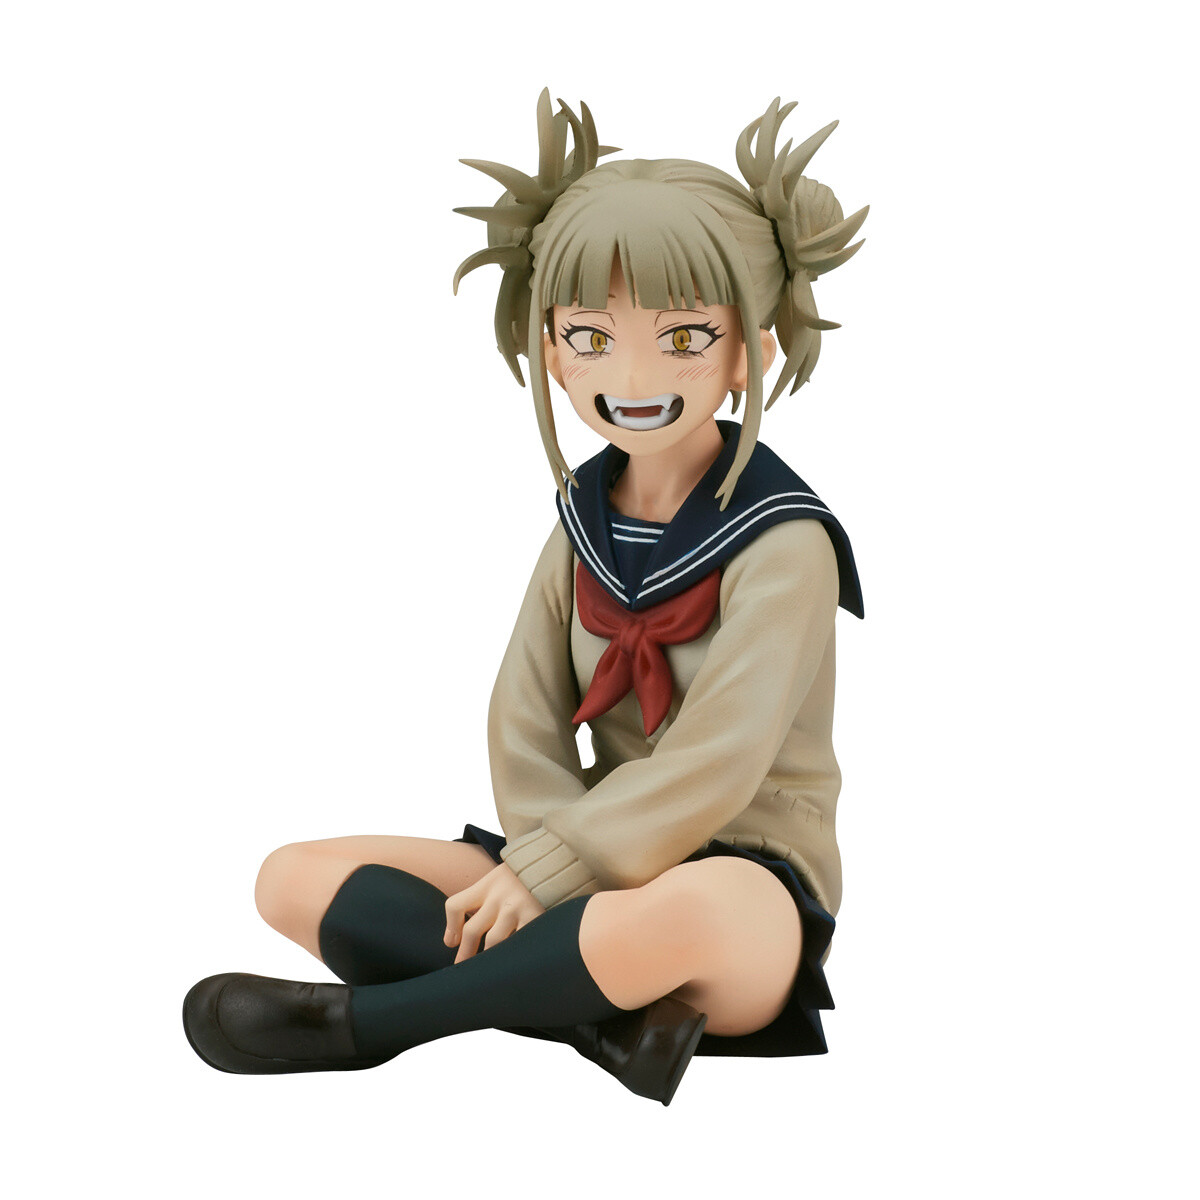 Amazon.com: MHA Figure Himiko Toga Figure Anime Figure Action Figure,  6.3''(16cm) Anime Character Himiko Toga w/Face Cover Collectible Toy : Toys  & Games